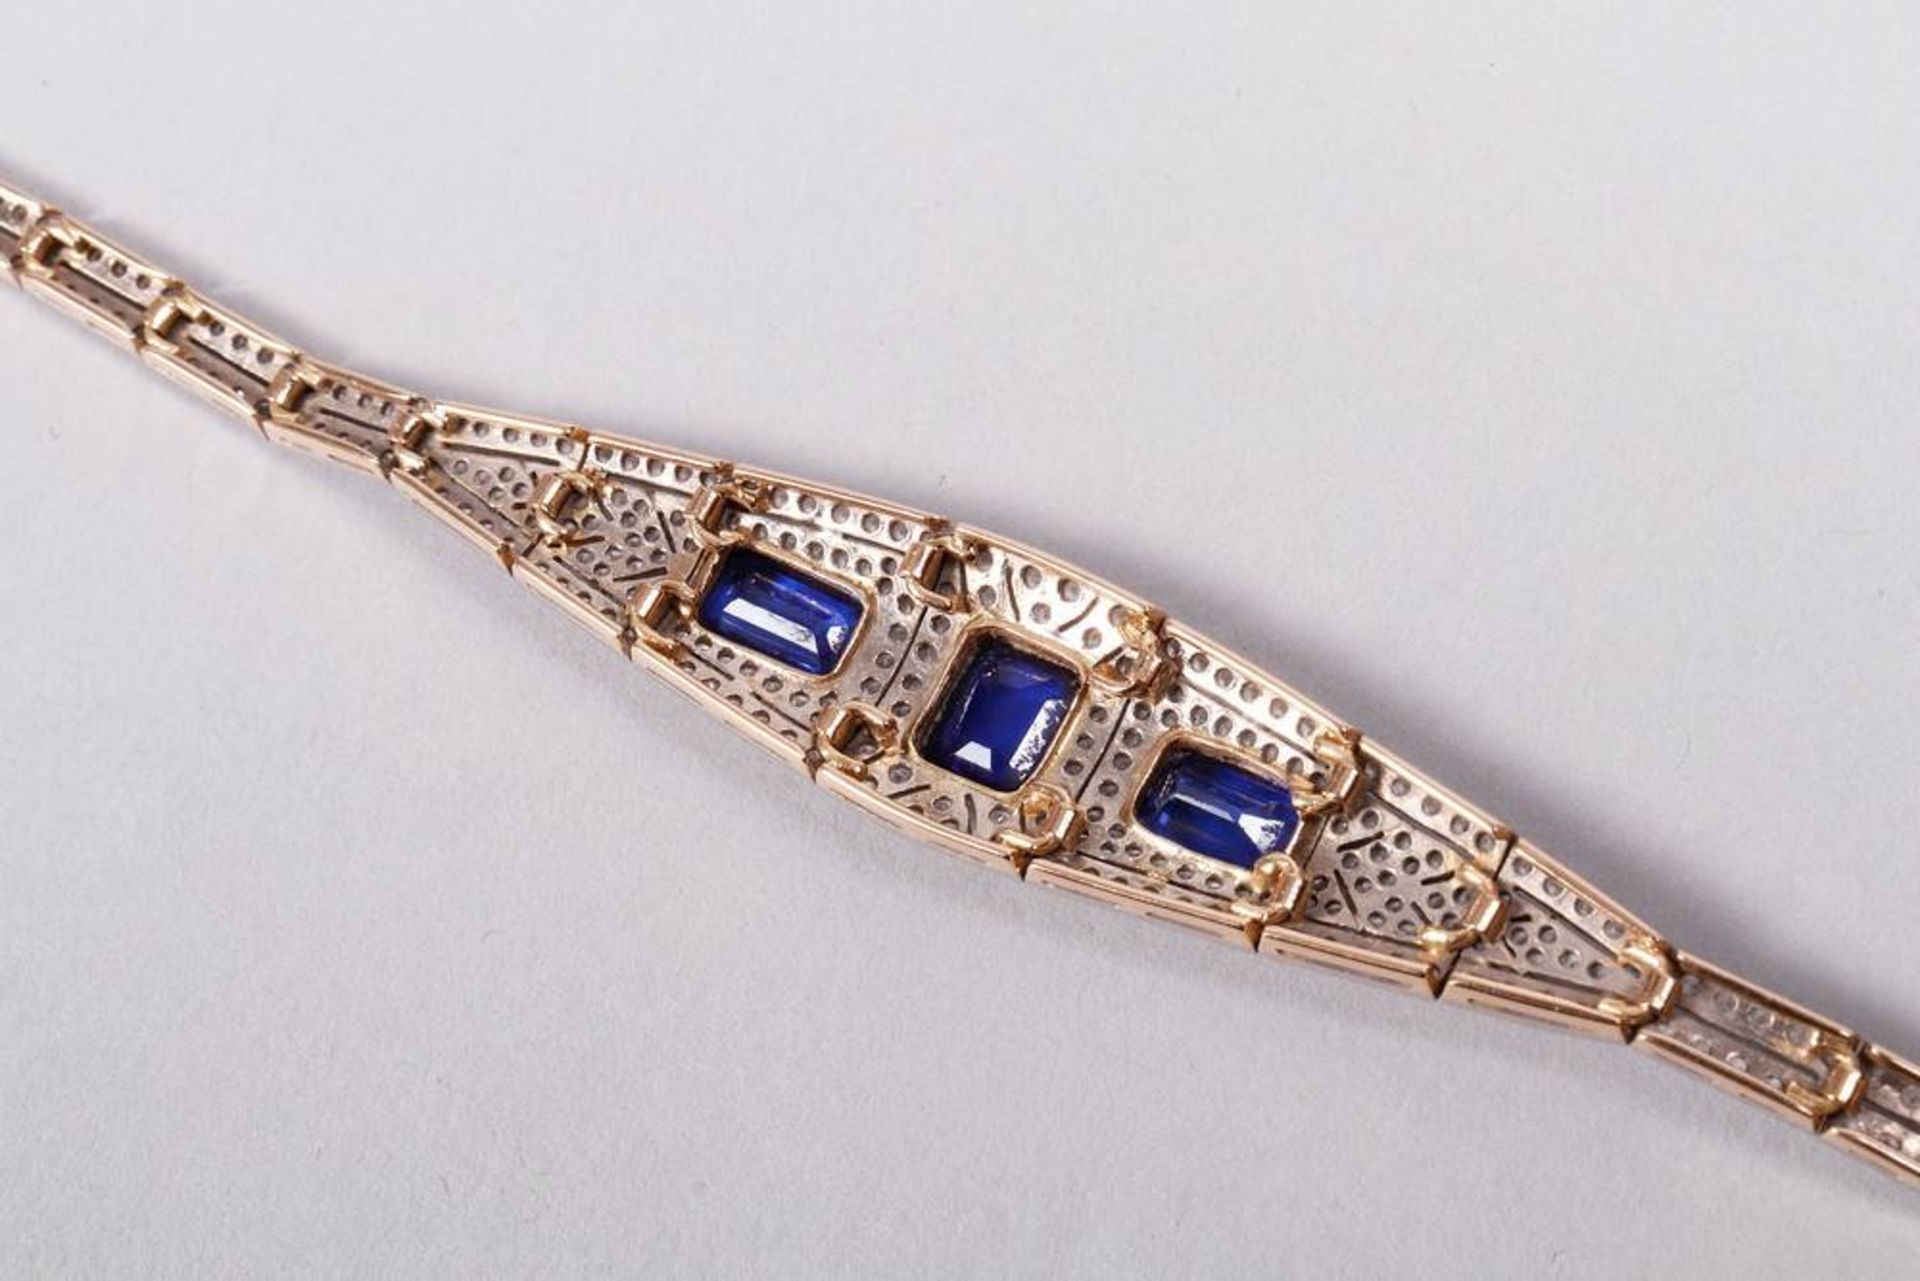 Art Deco bracelet with diamonds and sapphires, 750 gold - Image 4 of 4